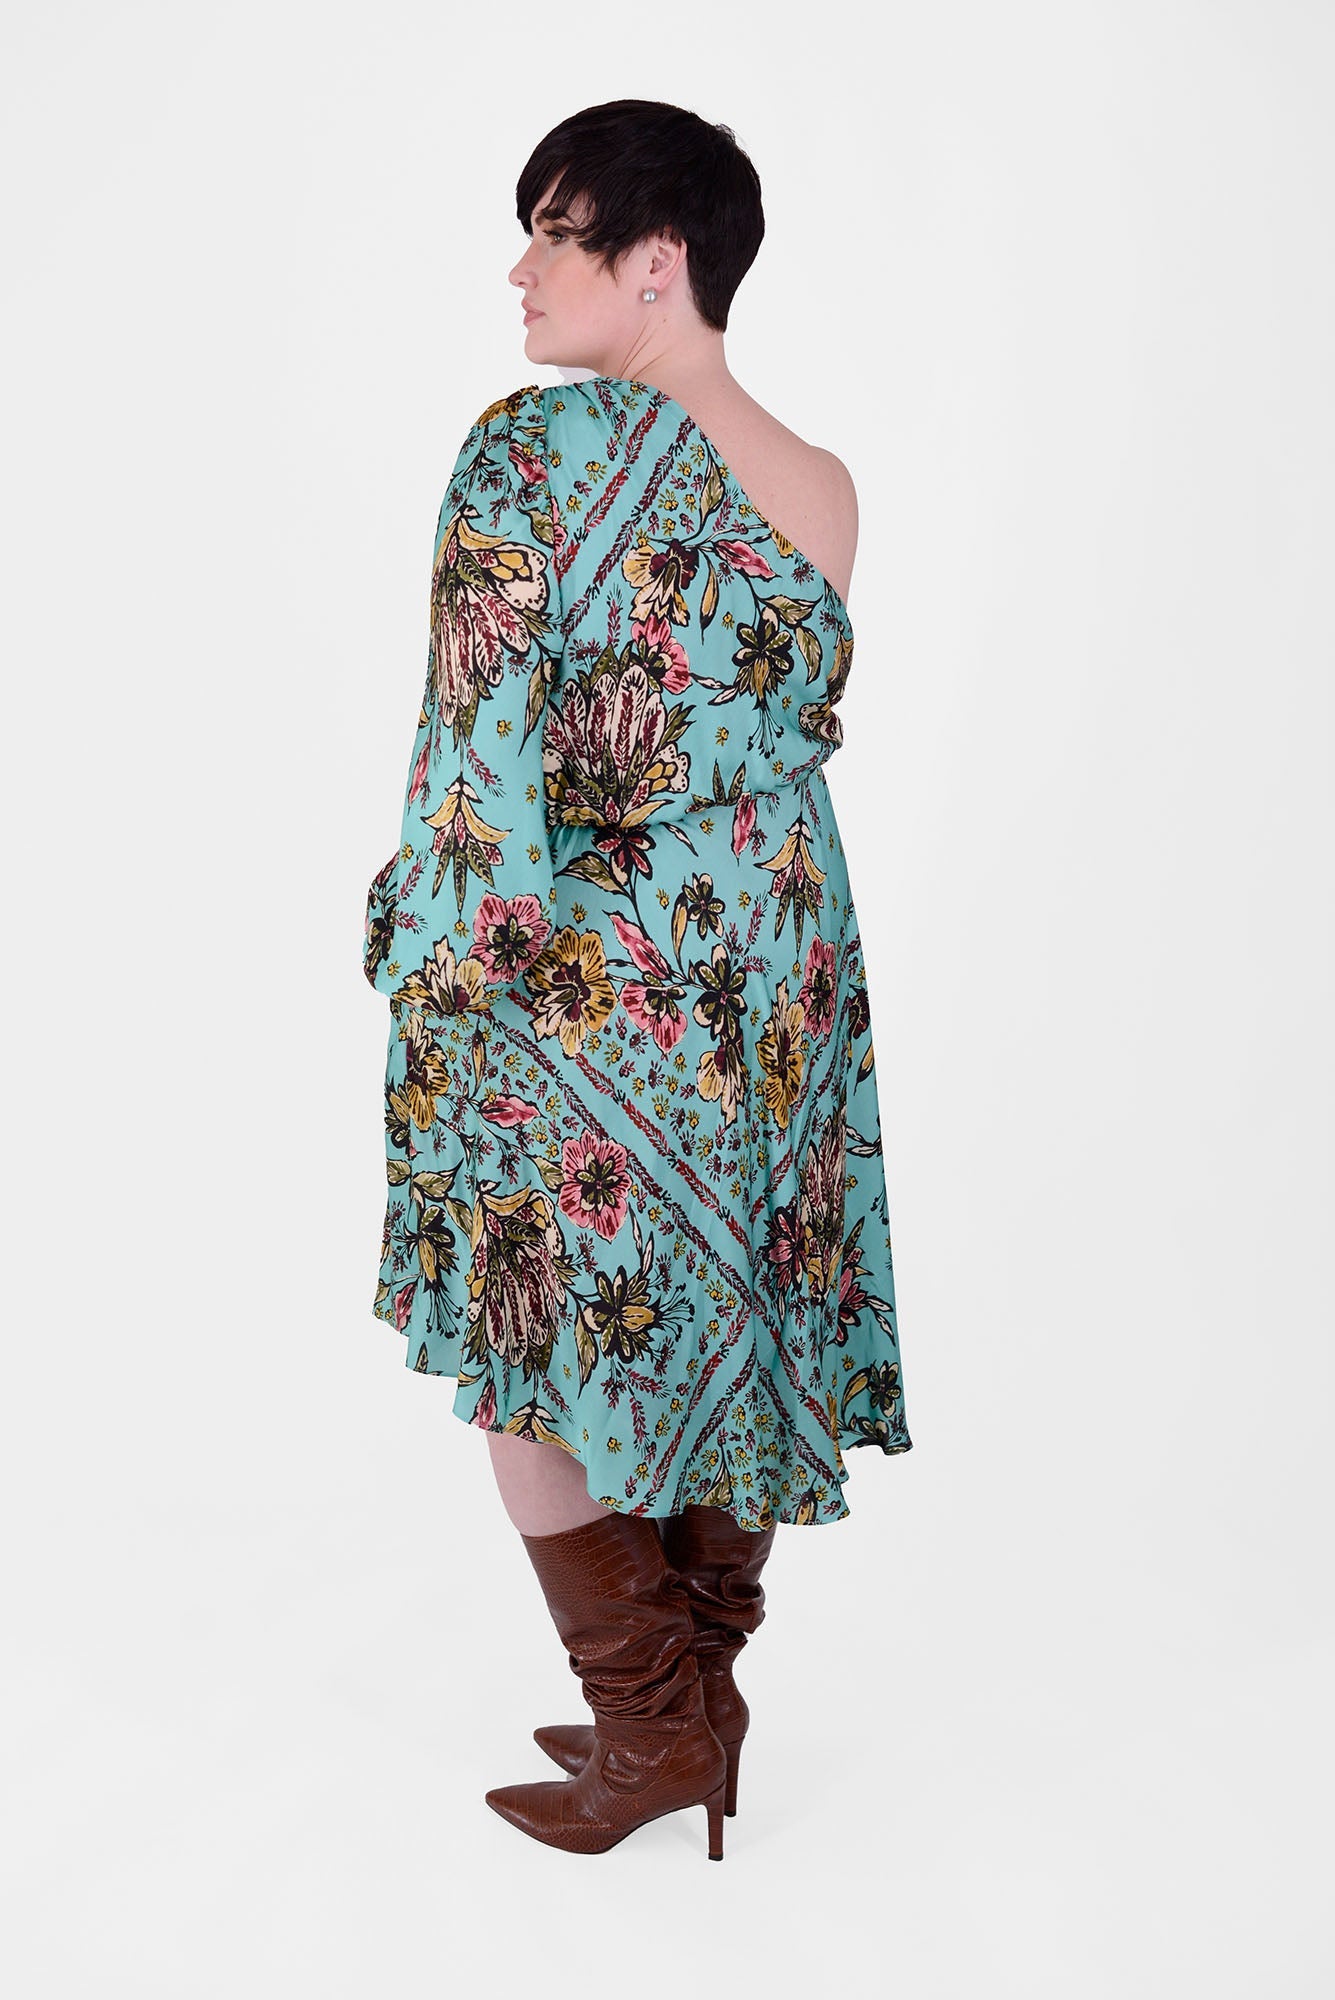 Mayes NYC Olivia One Shoulder Dress Aqua ground color Scarf Print worn by model Max